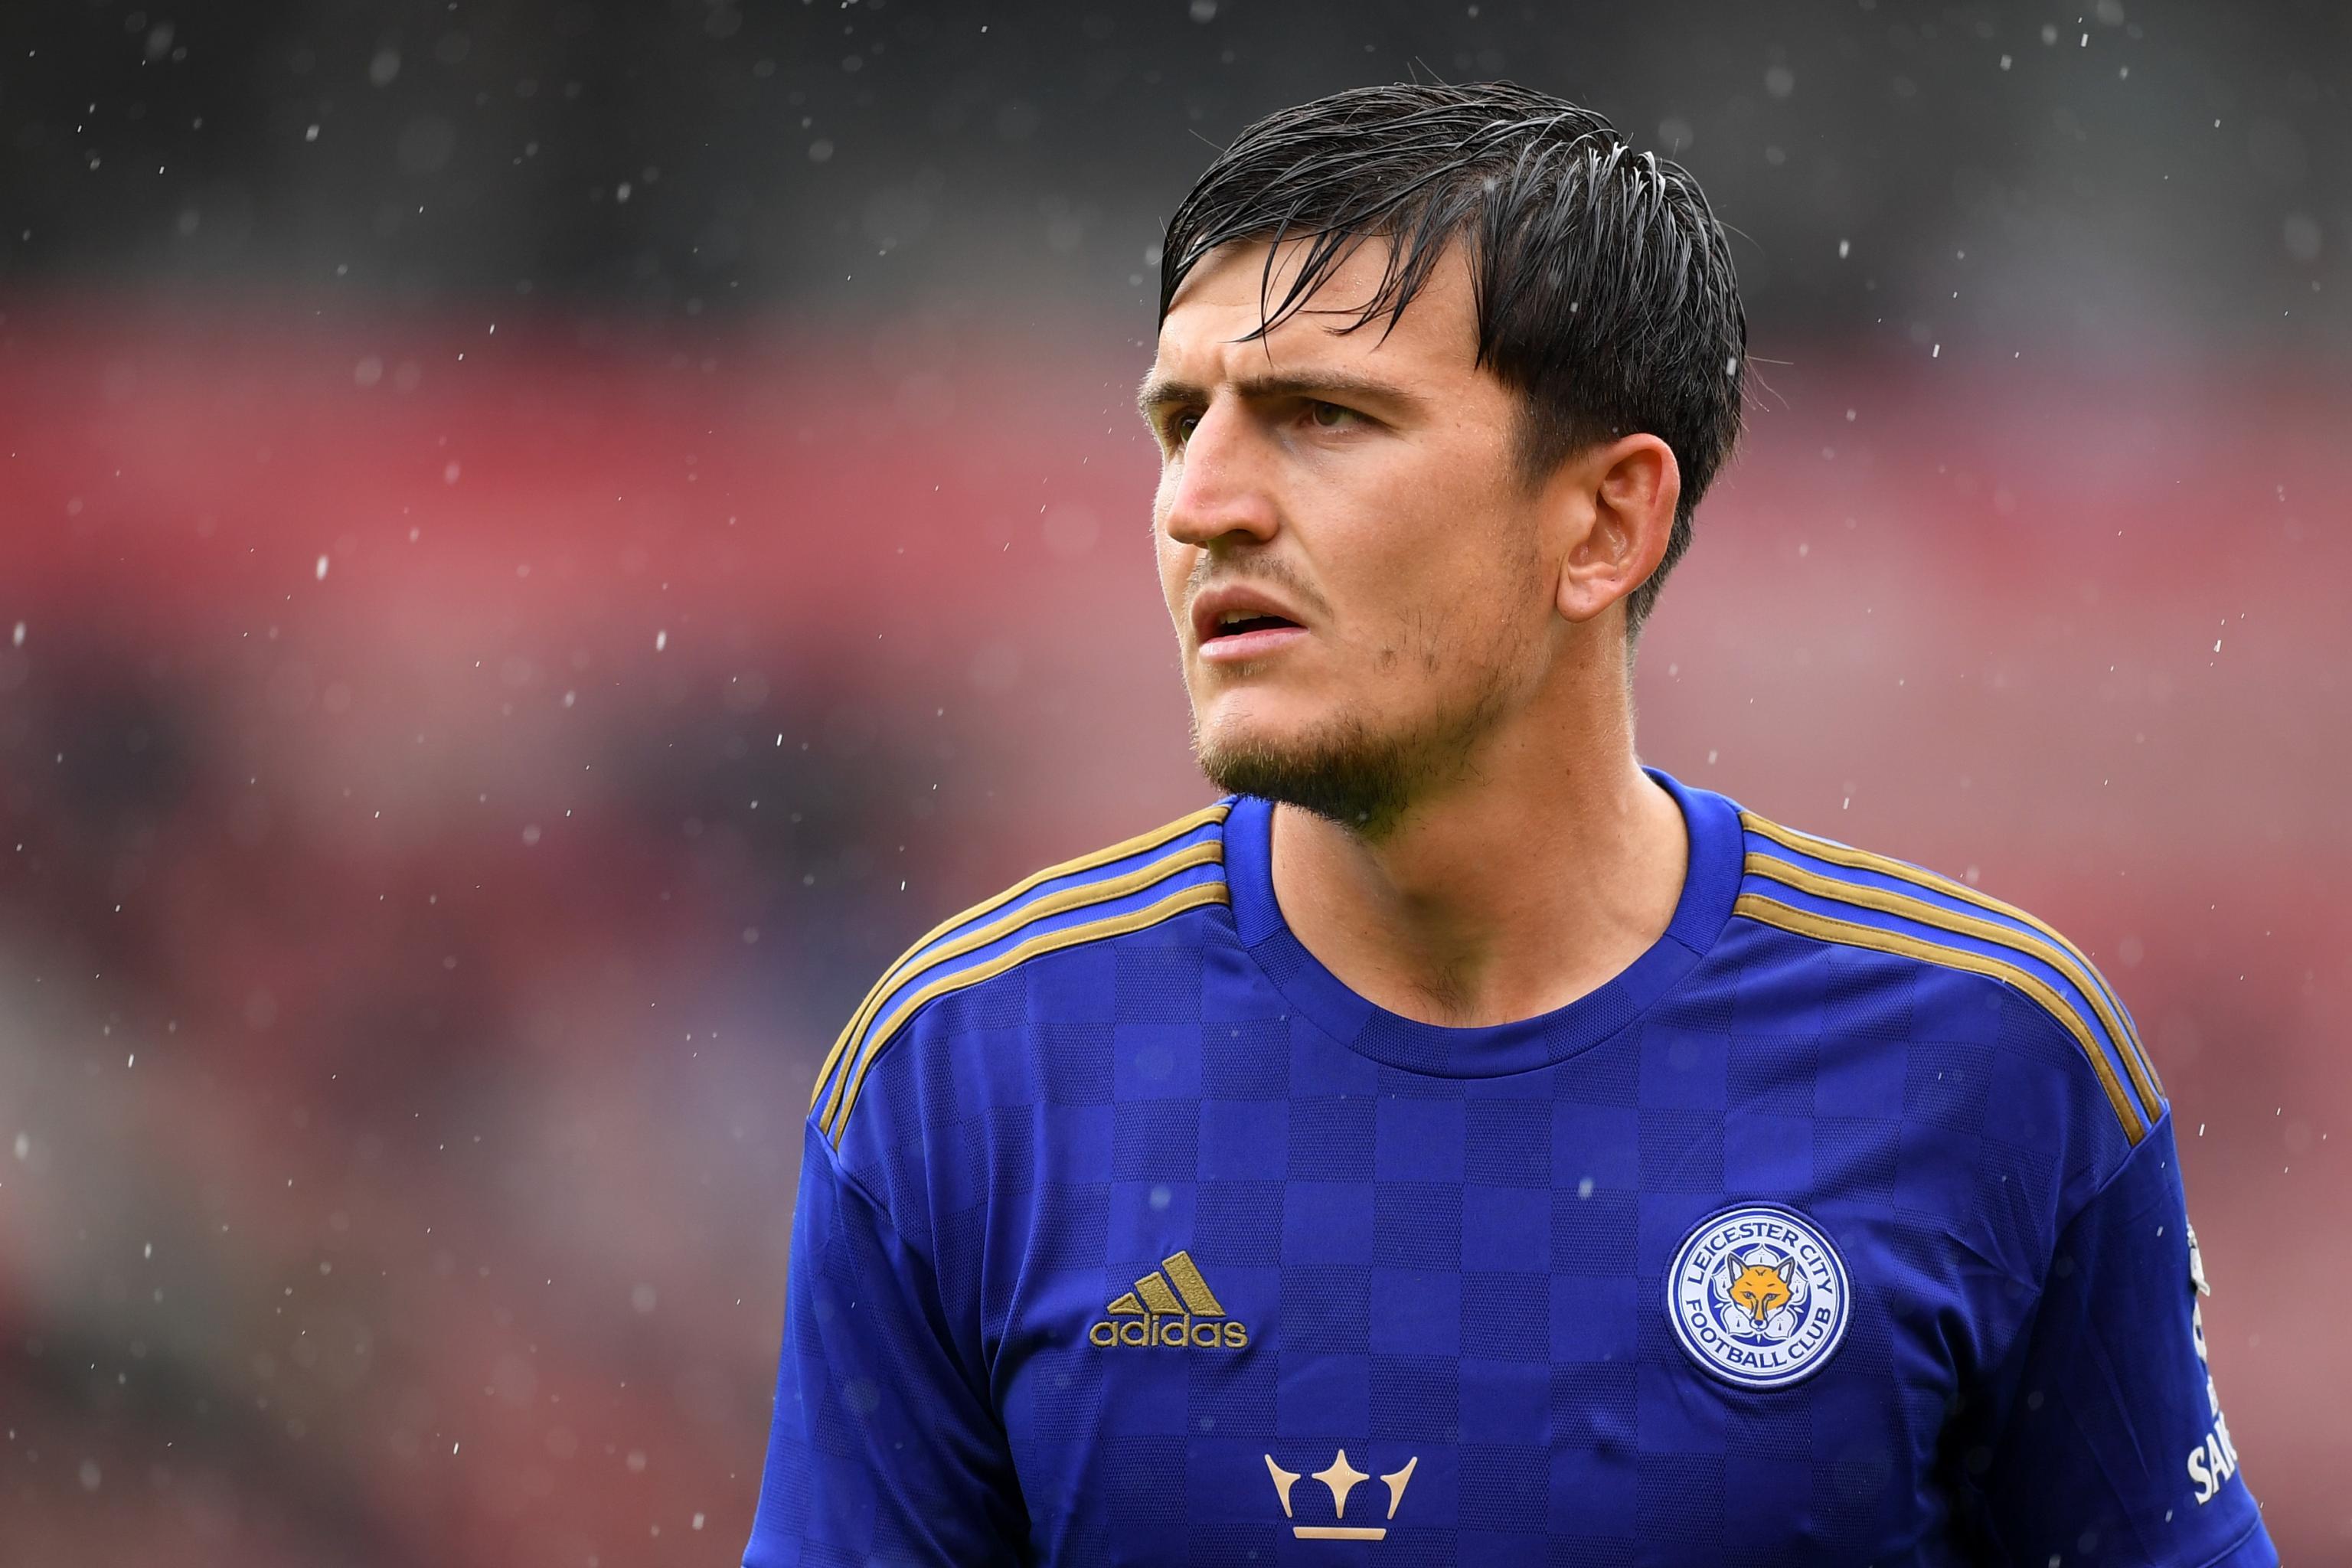 Manchester United Transfer Rumours: Harry Maguire Deal Done